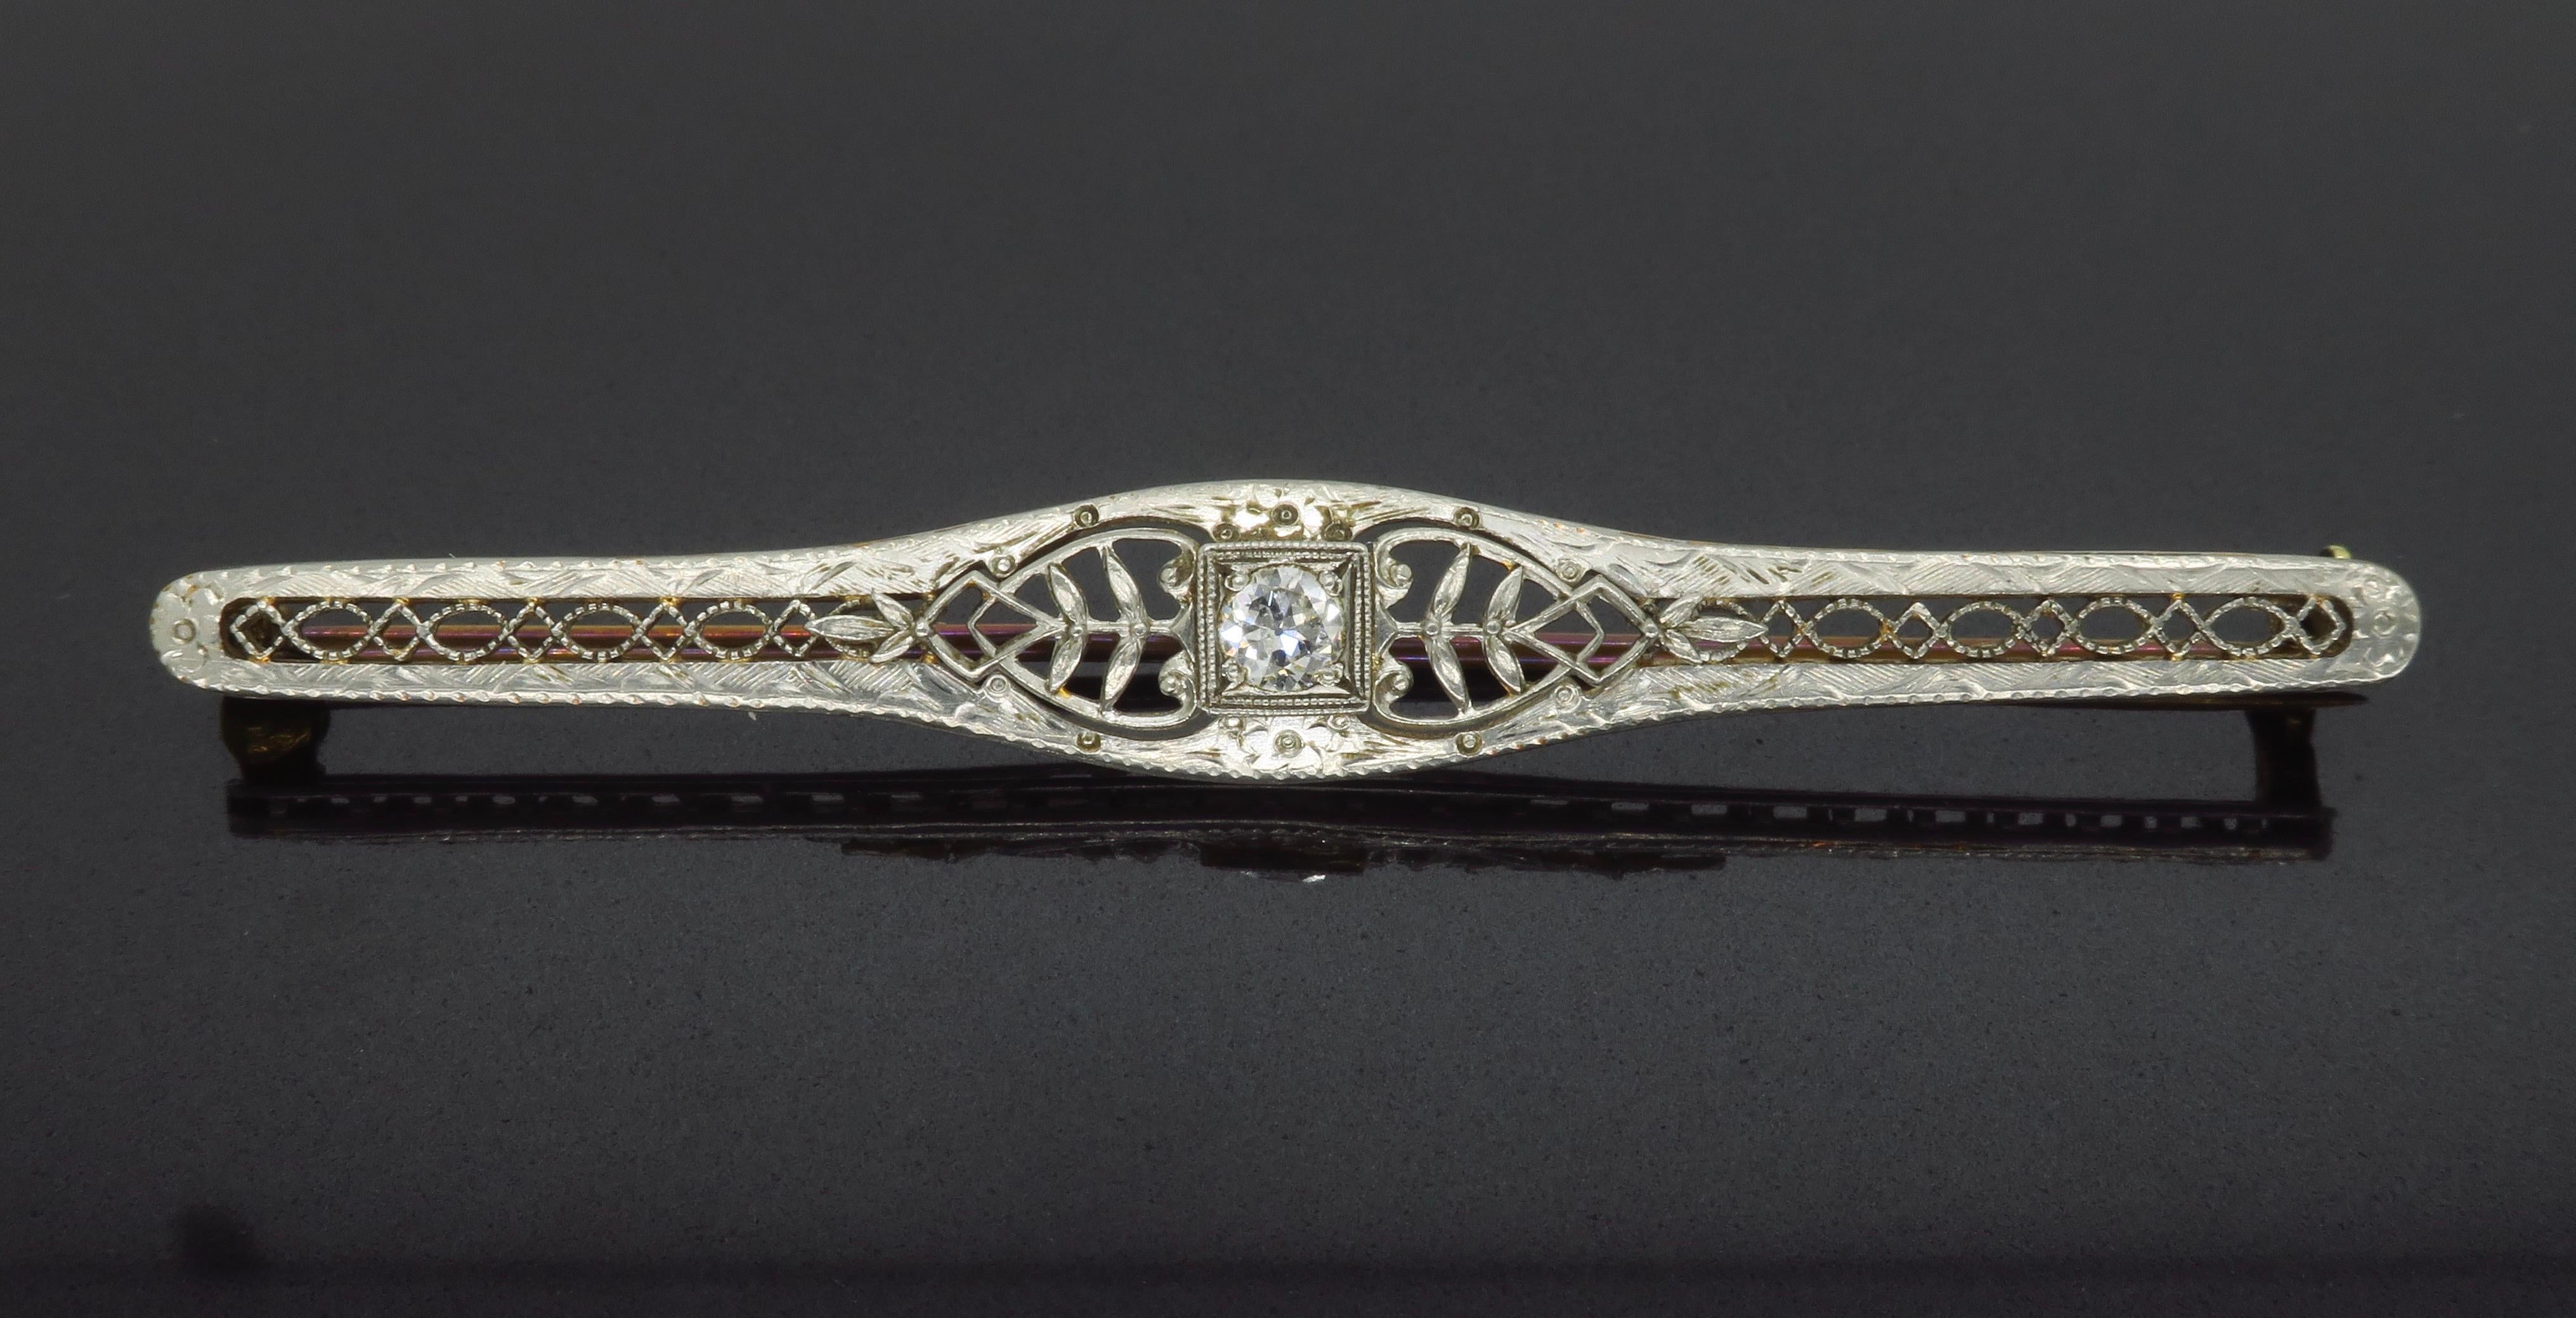 Estate bar style brooch made in Platinum and Gold. 

Diamond Carat Weight: Approximately .15CT
Diamond Cut: Old European Cut 
Color: F-G
Clarity: SI1
Metal: Platinum & 14k Gold 
Weight: 3.6 Grams
Length: Approximately 2.5” Long